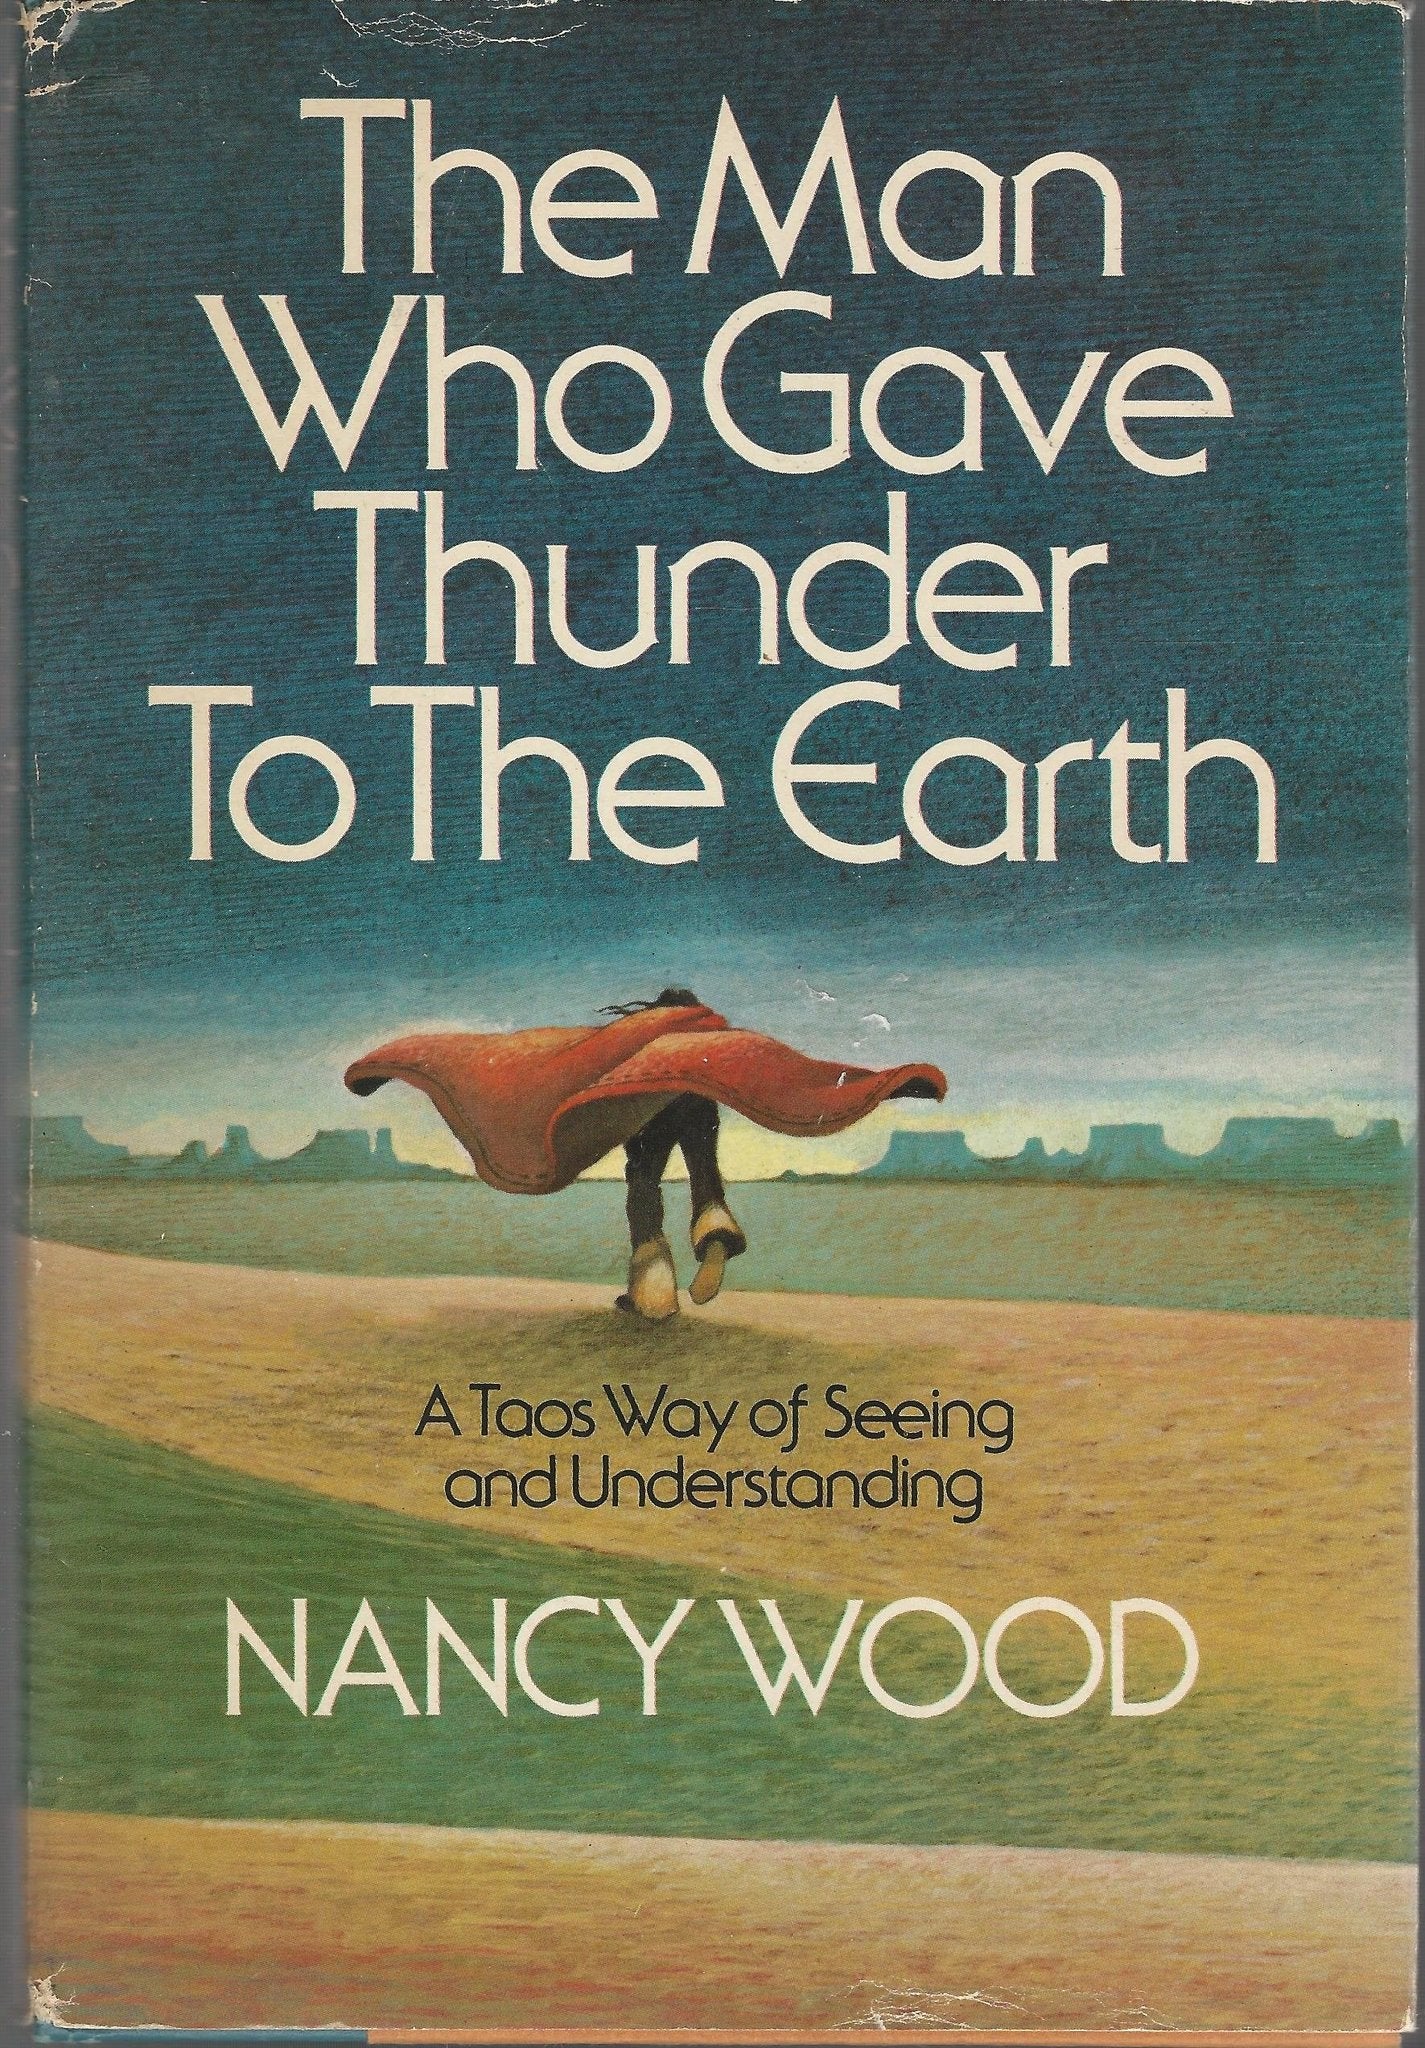 The Man Who Gave Thunder to the Earth by Nancy Wood